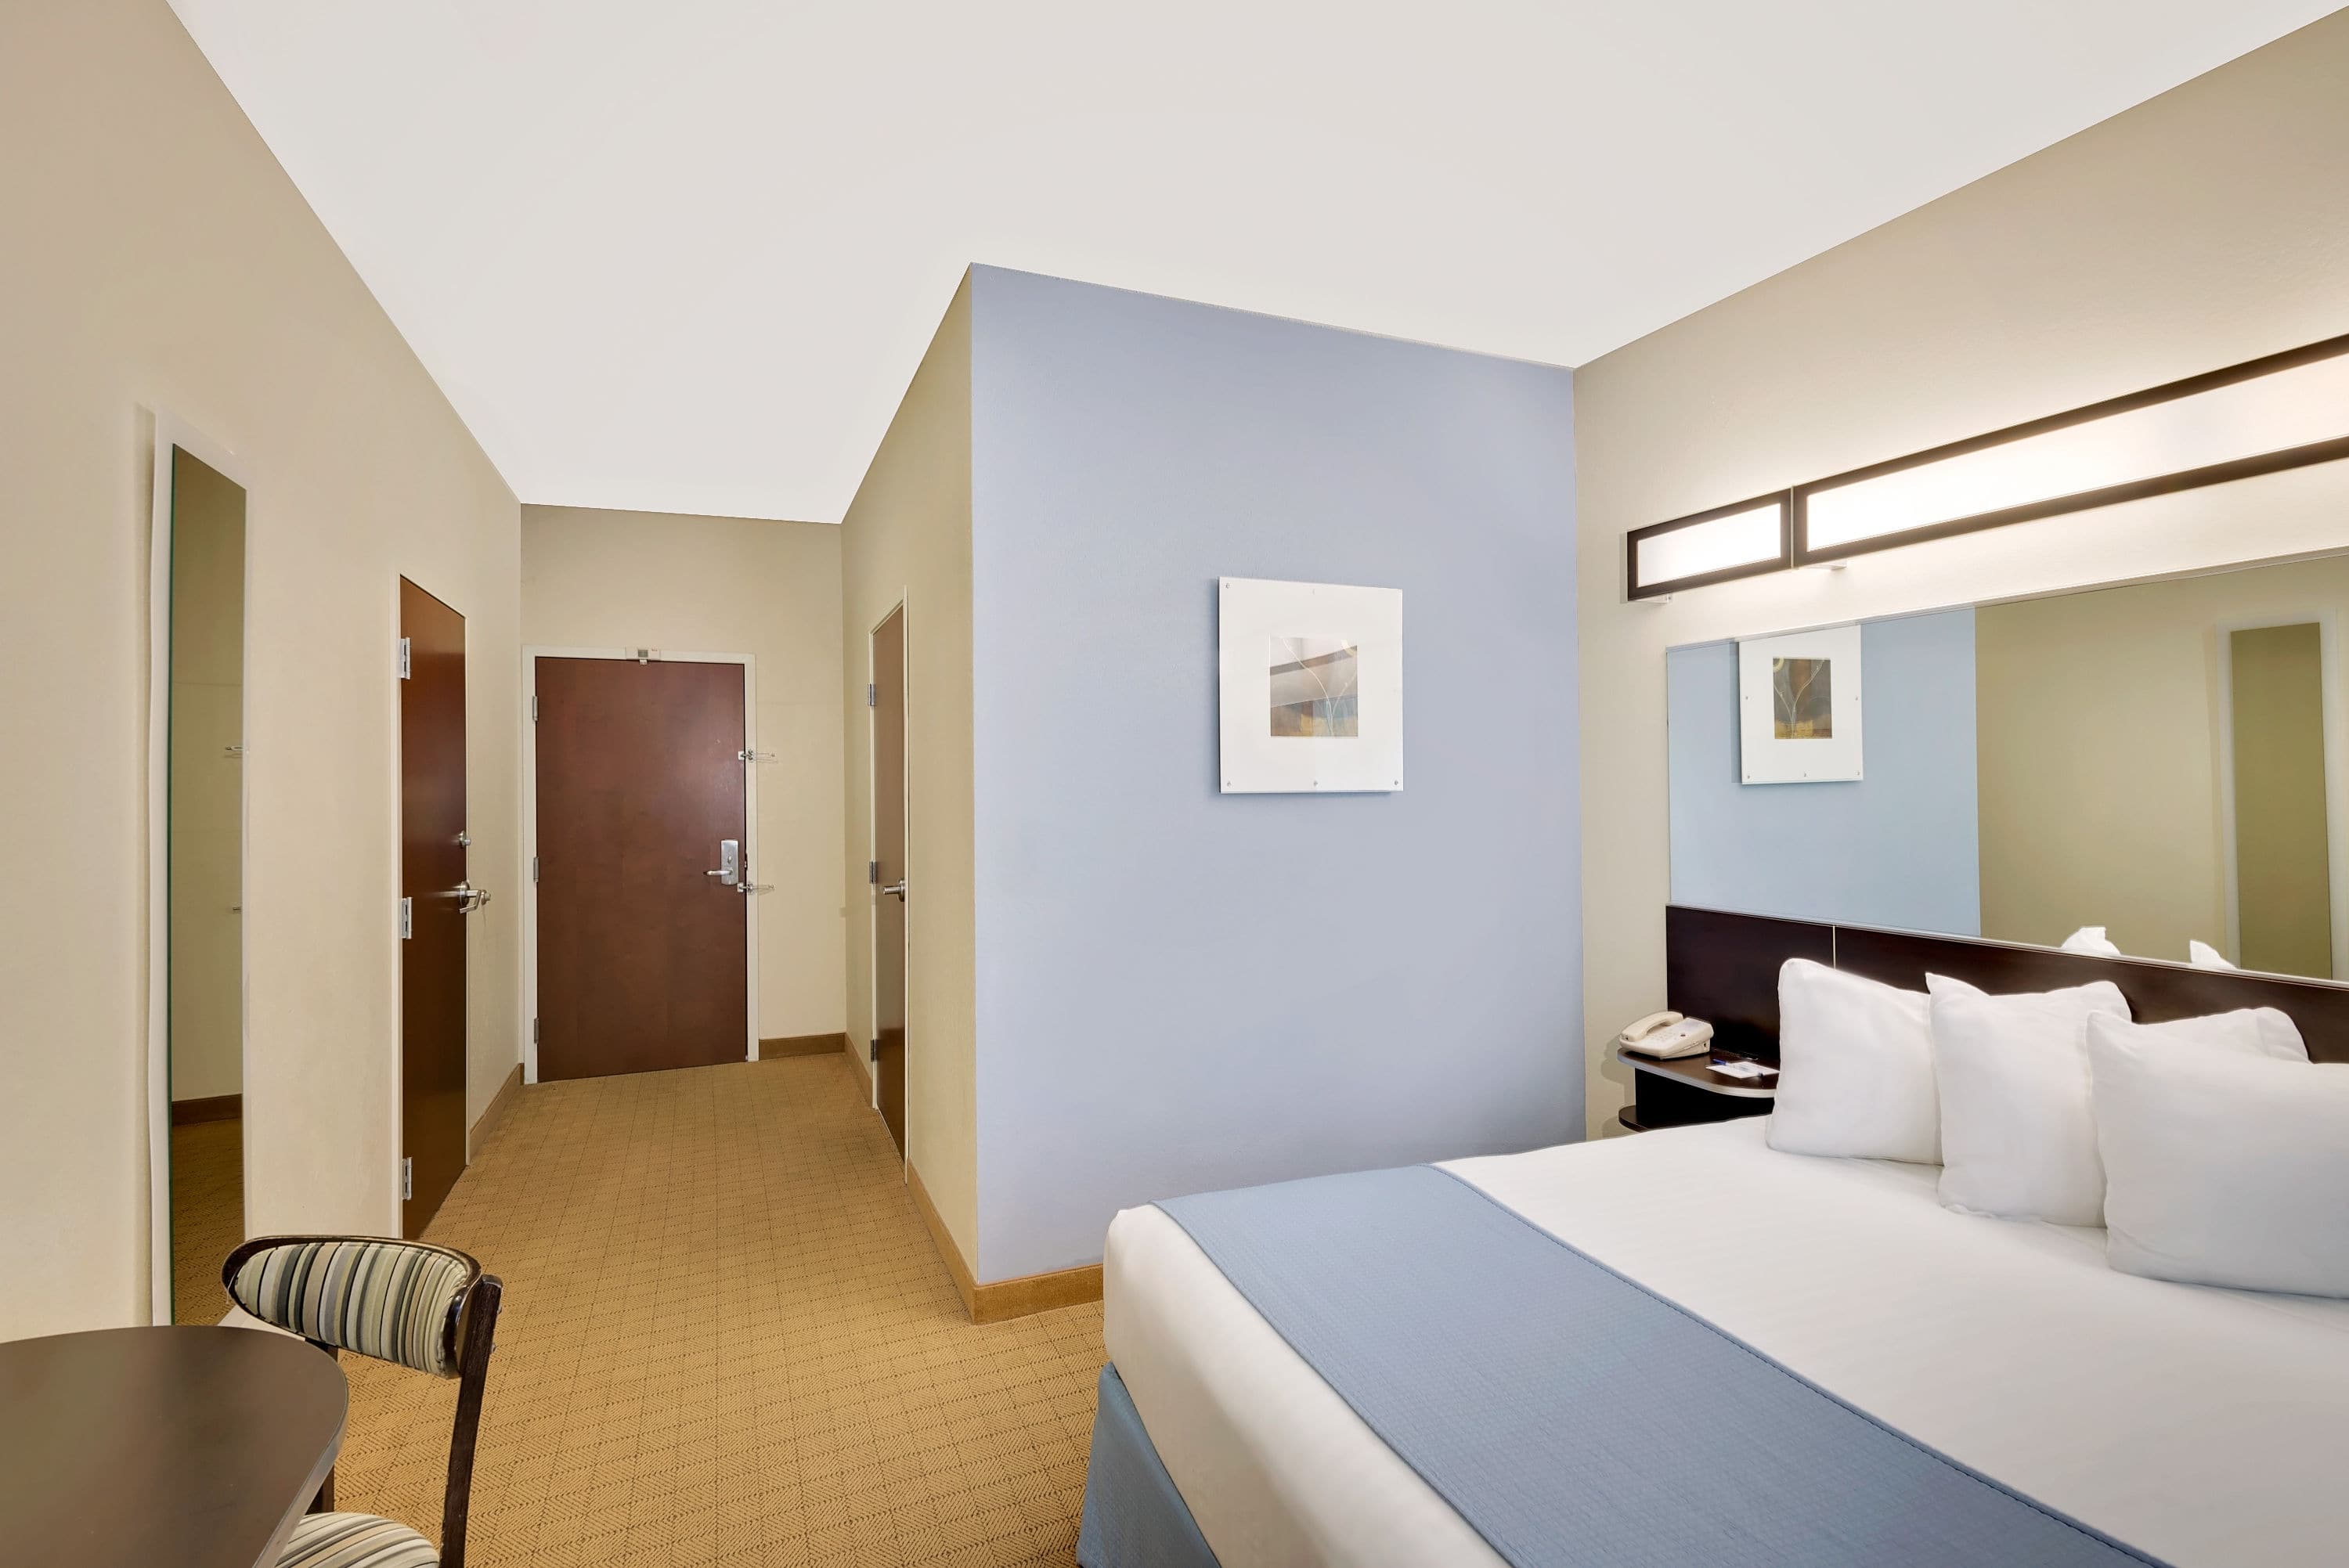 Promo [50% Off] Microtel Inn And Suites By Wyndham Geneva United States - Hotel Near Me | W ...